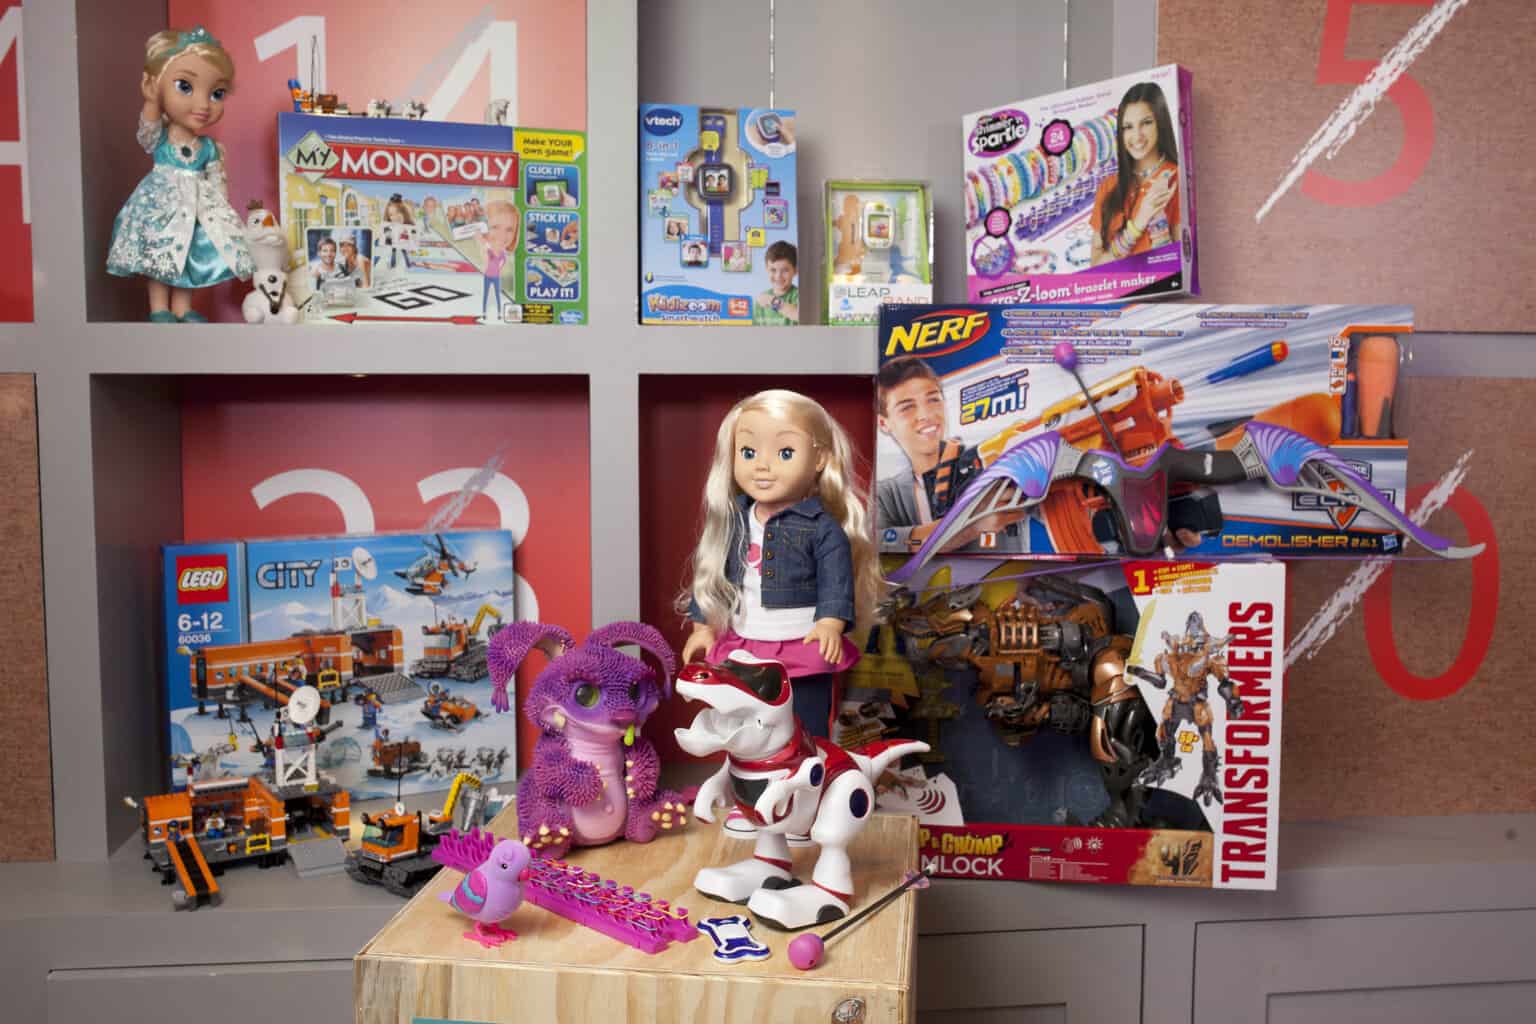 Top Kids Toys for Christmas 2014! Fun Kids the UK's children's